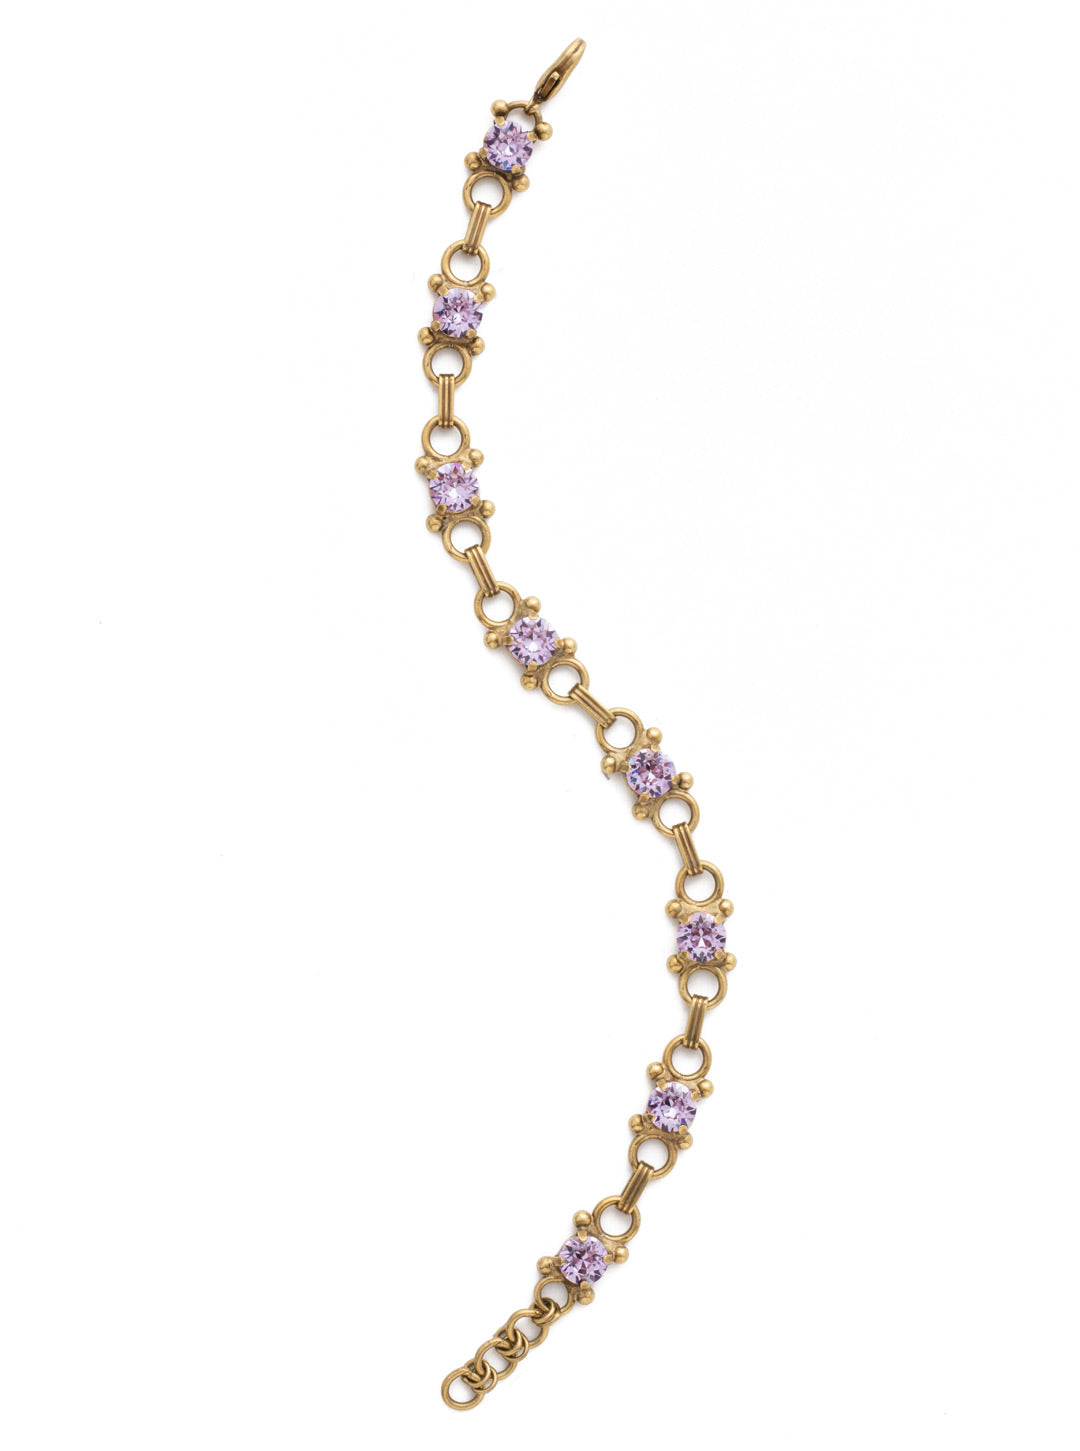 Mini Eyelet Line Bracelet - BDH5AGVI - <p>Our mini Eyelet Line Bracelet offers a classic design with edgy elements. Add this line bracelet to any look for just enough sparkle. From Sorrelli's Violet collection in our Antique Gold-tone finish.</p>